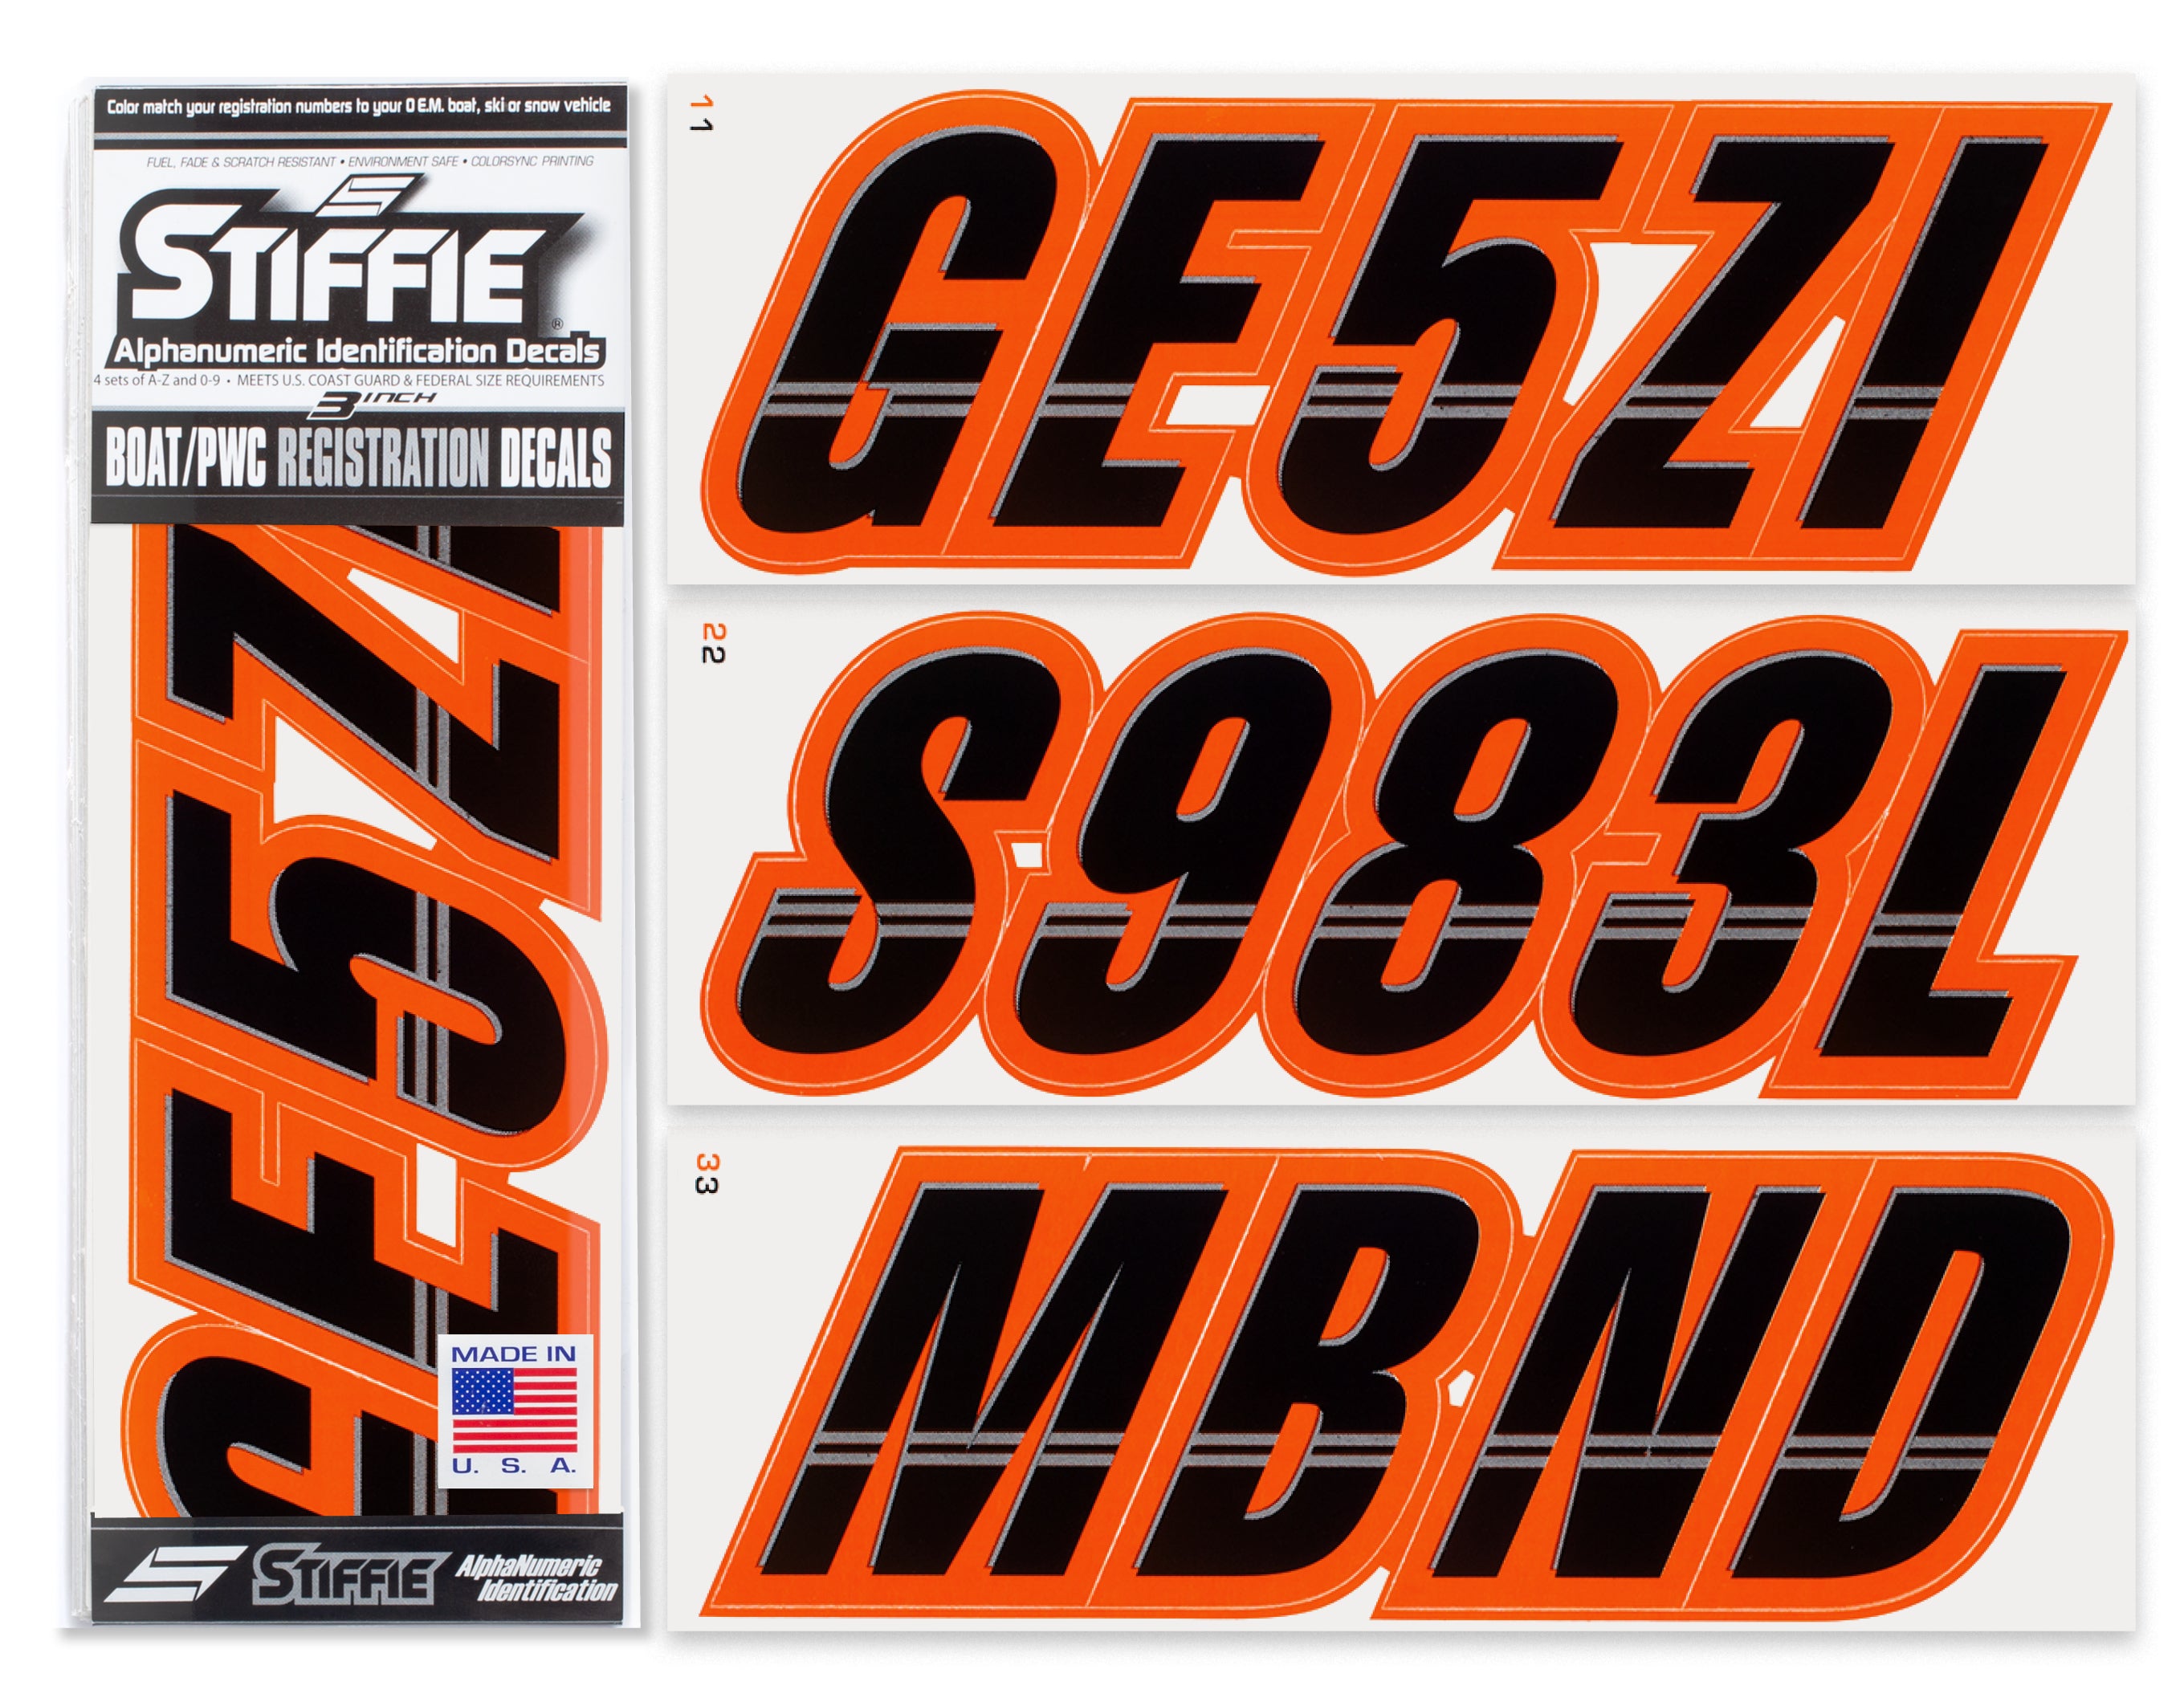 Techtron Black/Orange 3" Alpha-Numeric Registration Identification Numbers Stickers Decals for Boats & Personal Watercraft